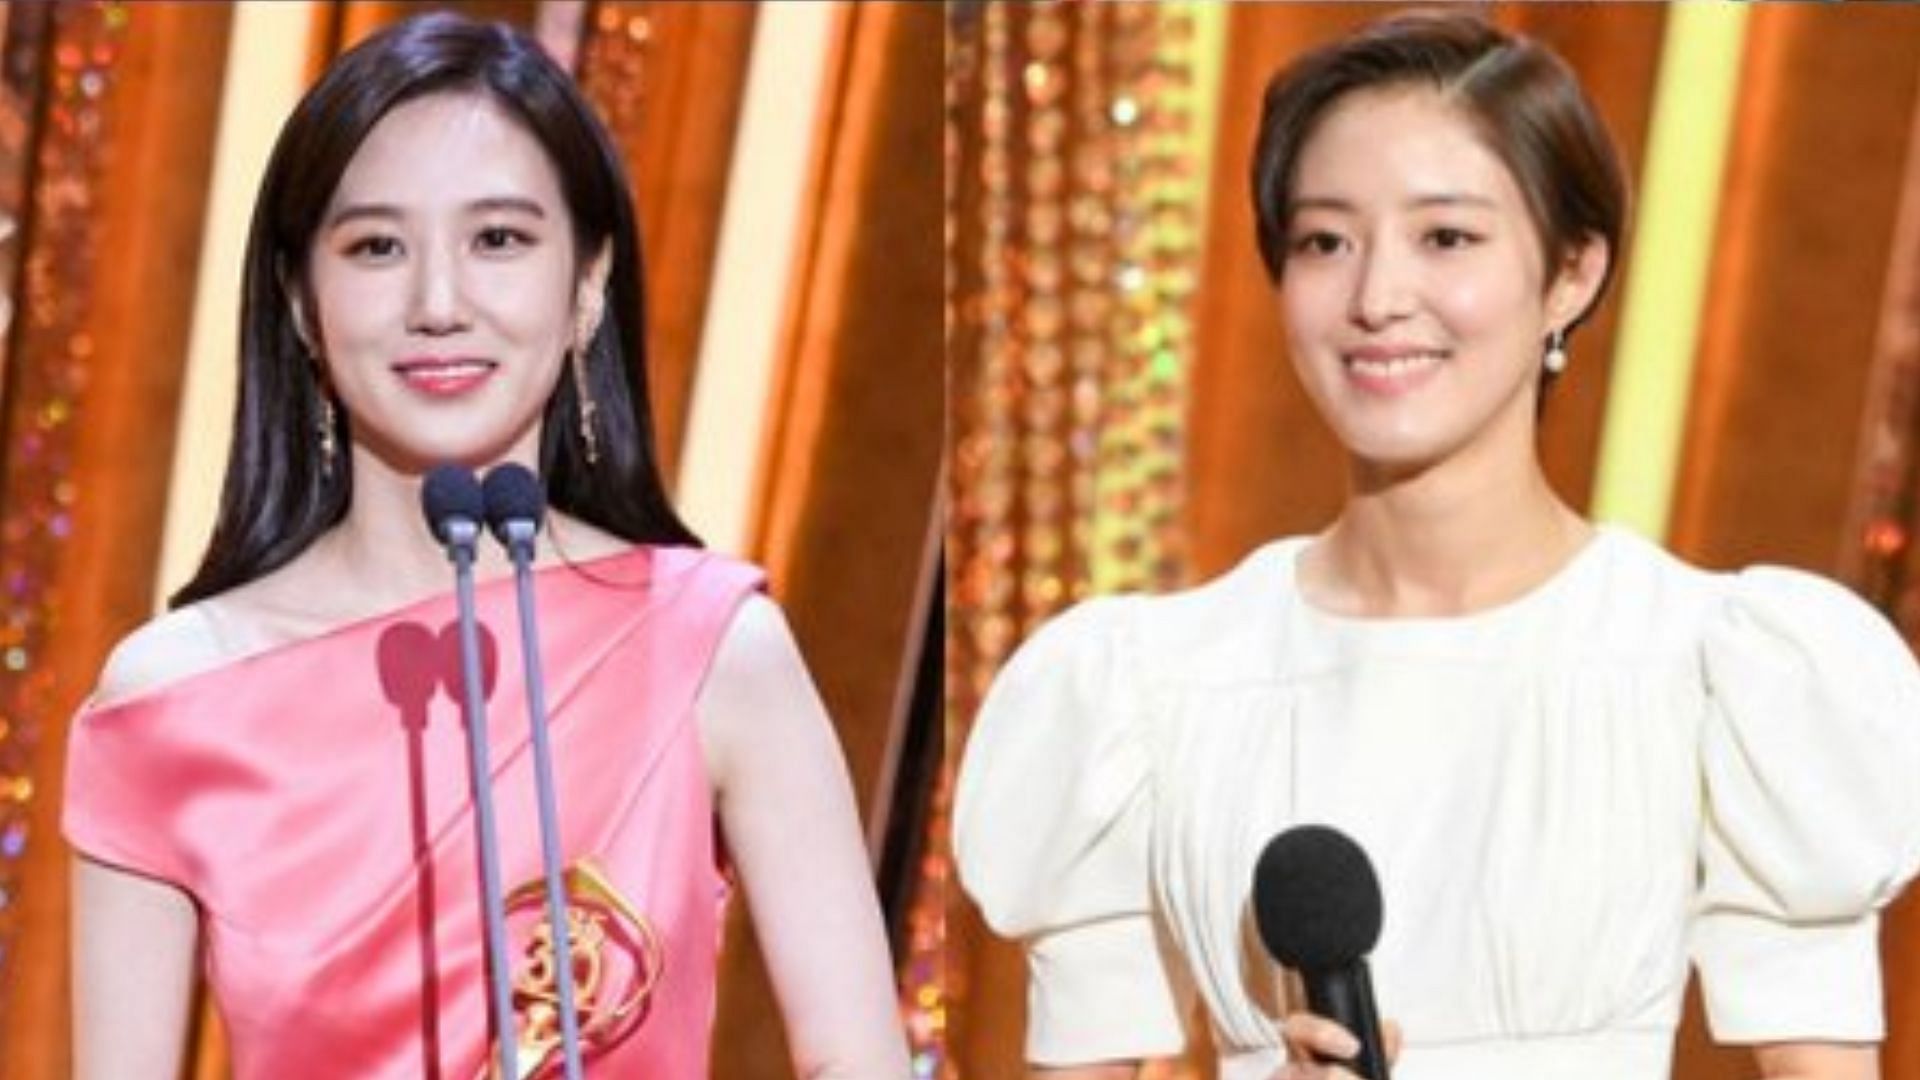 Park Eun-bin and Lee Se-young's childhood “catfight” captures K-drama fans'  attention on the internet